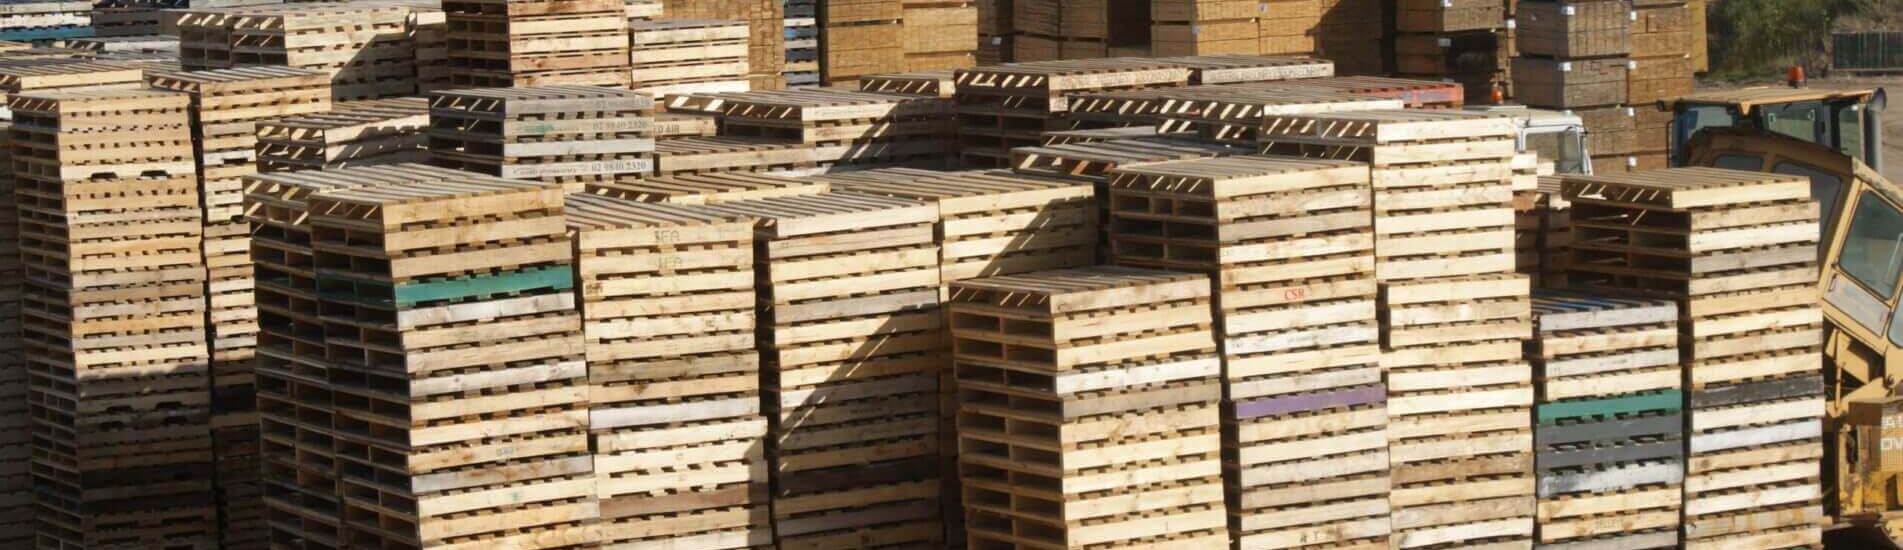 Smart Pallets Buy and Sell Second hand Pallets